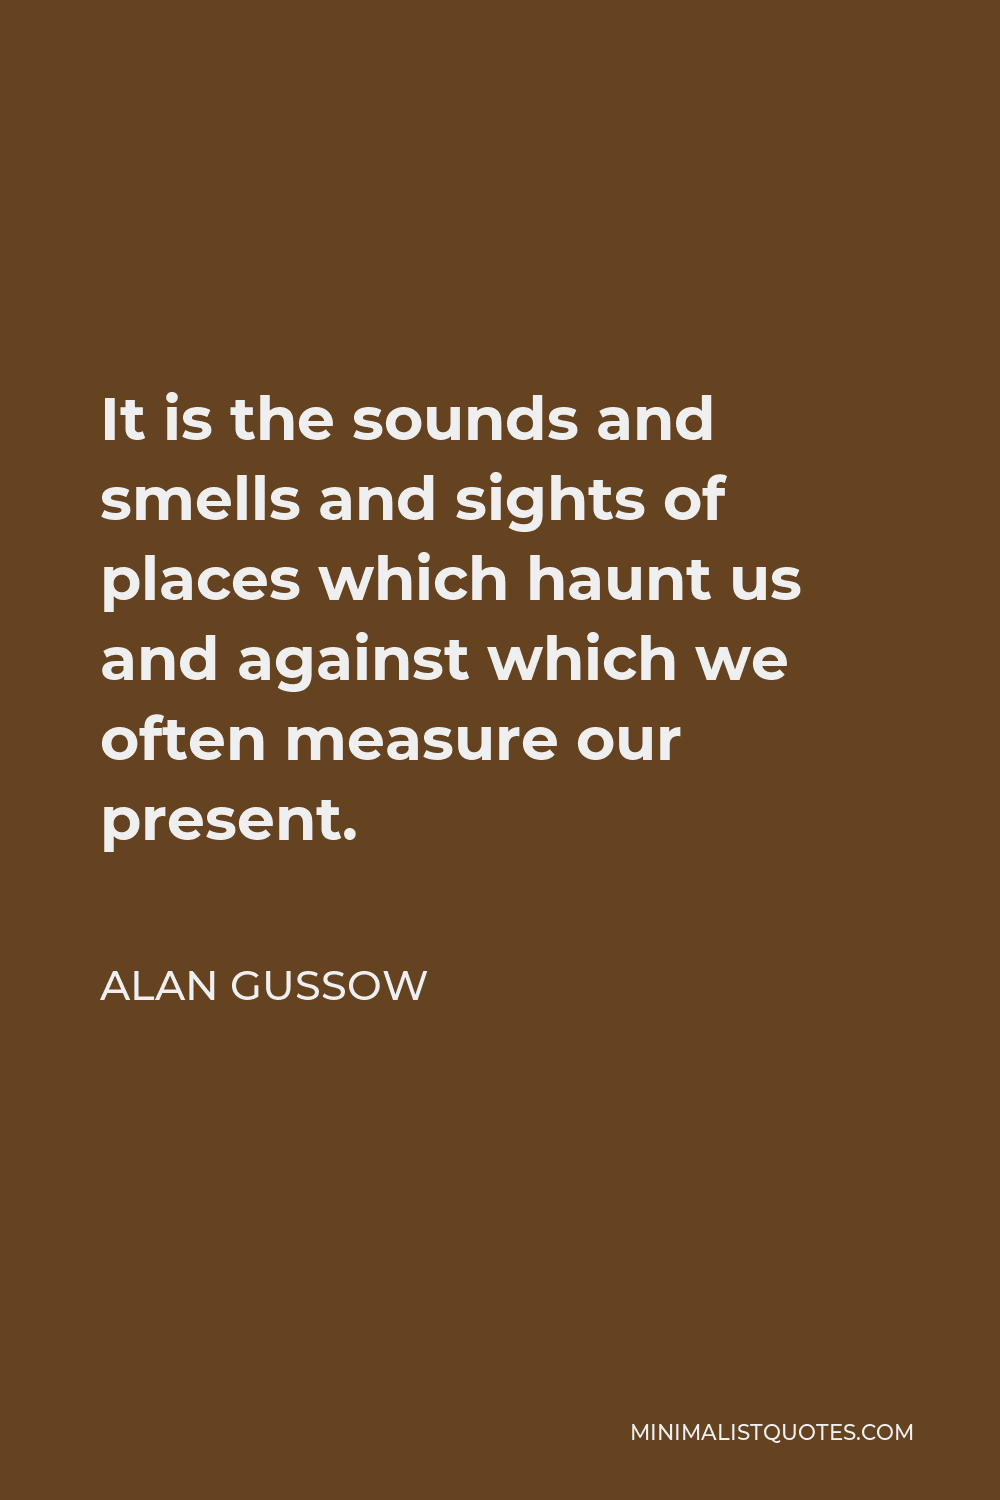 Alan Gussow Quote - It is the sounds and smells and sights of places which haunt us and against which we often measure our present.